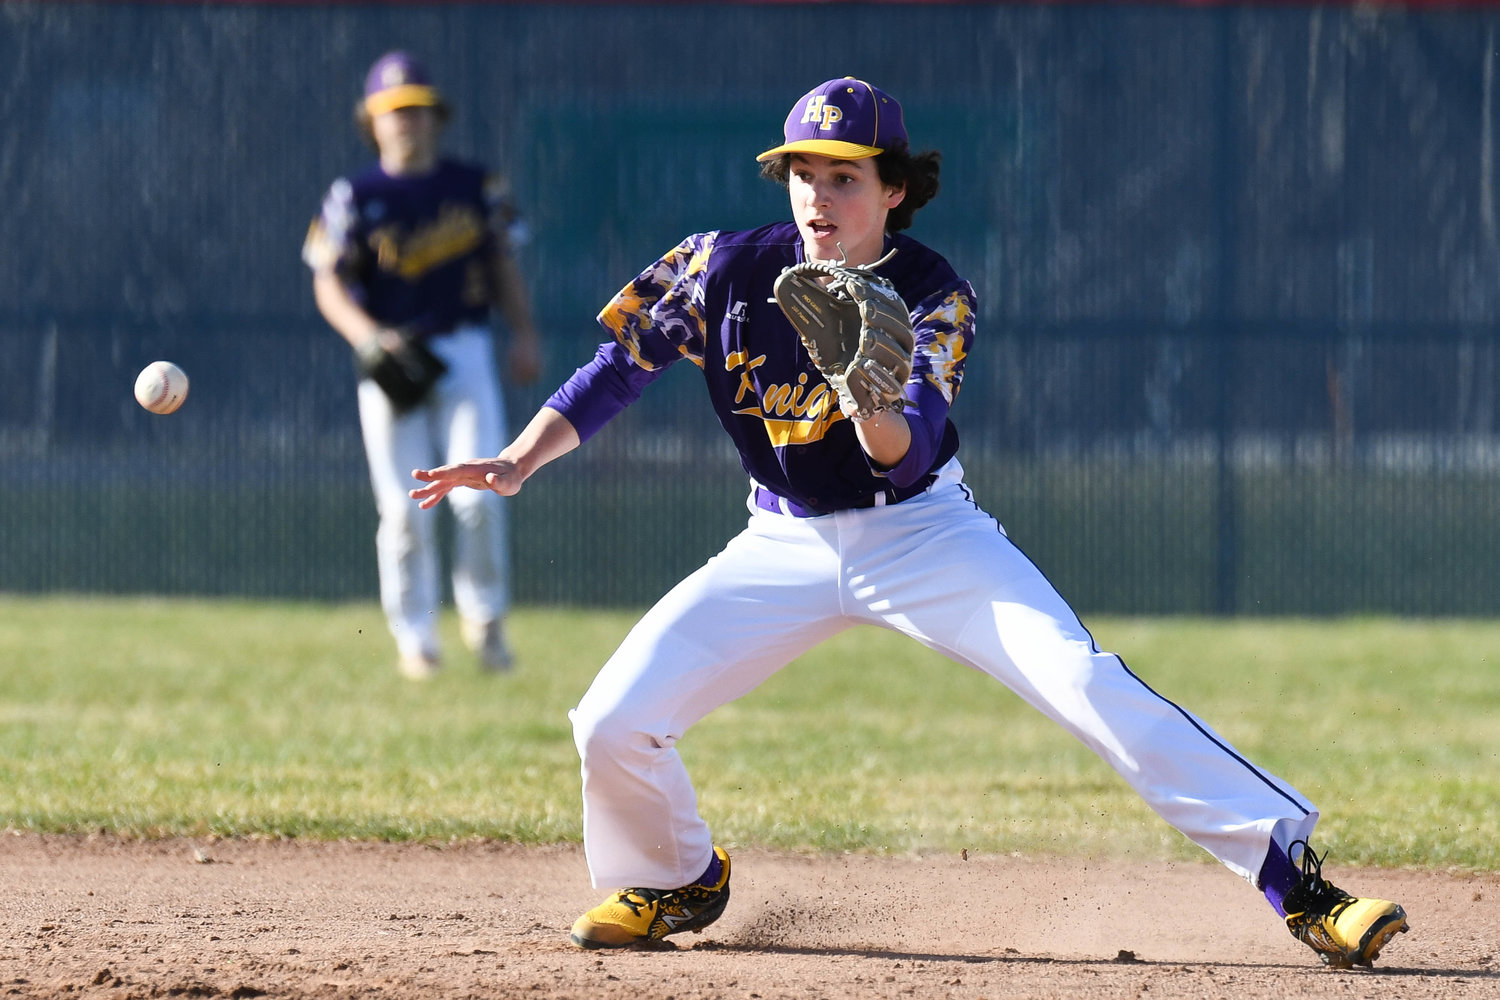 EYE ON THE BALL — Holland Patent shortstop Luke Benedetto fields a ground ball near second base during the game against New Hartford on Monday on the road in non-league play. Results were not available at press time.